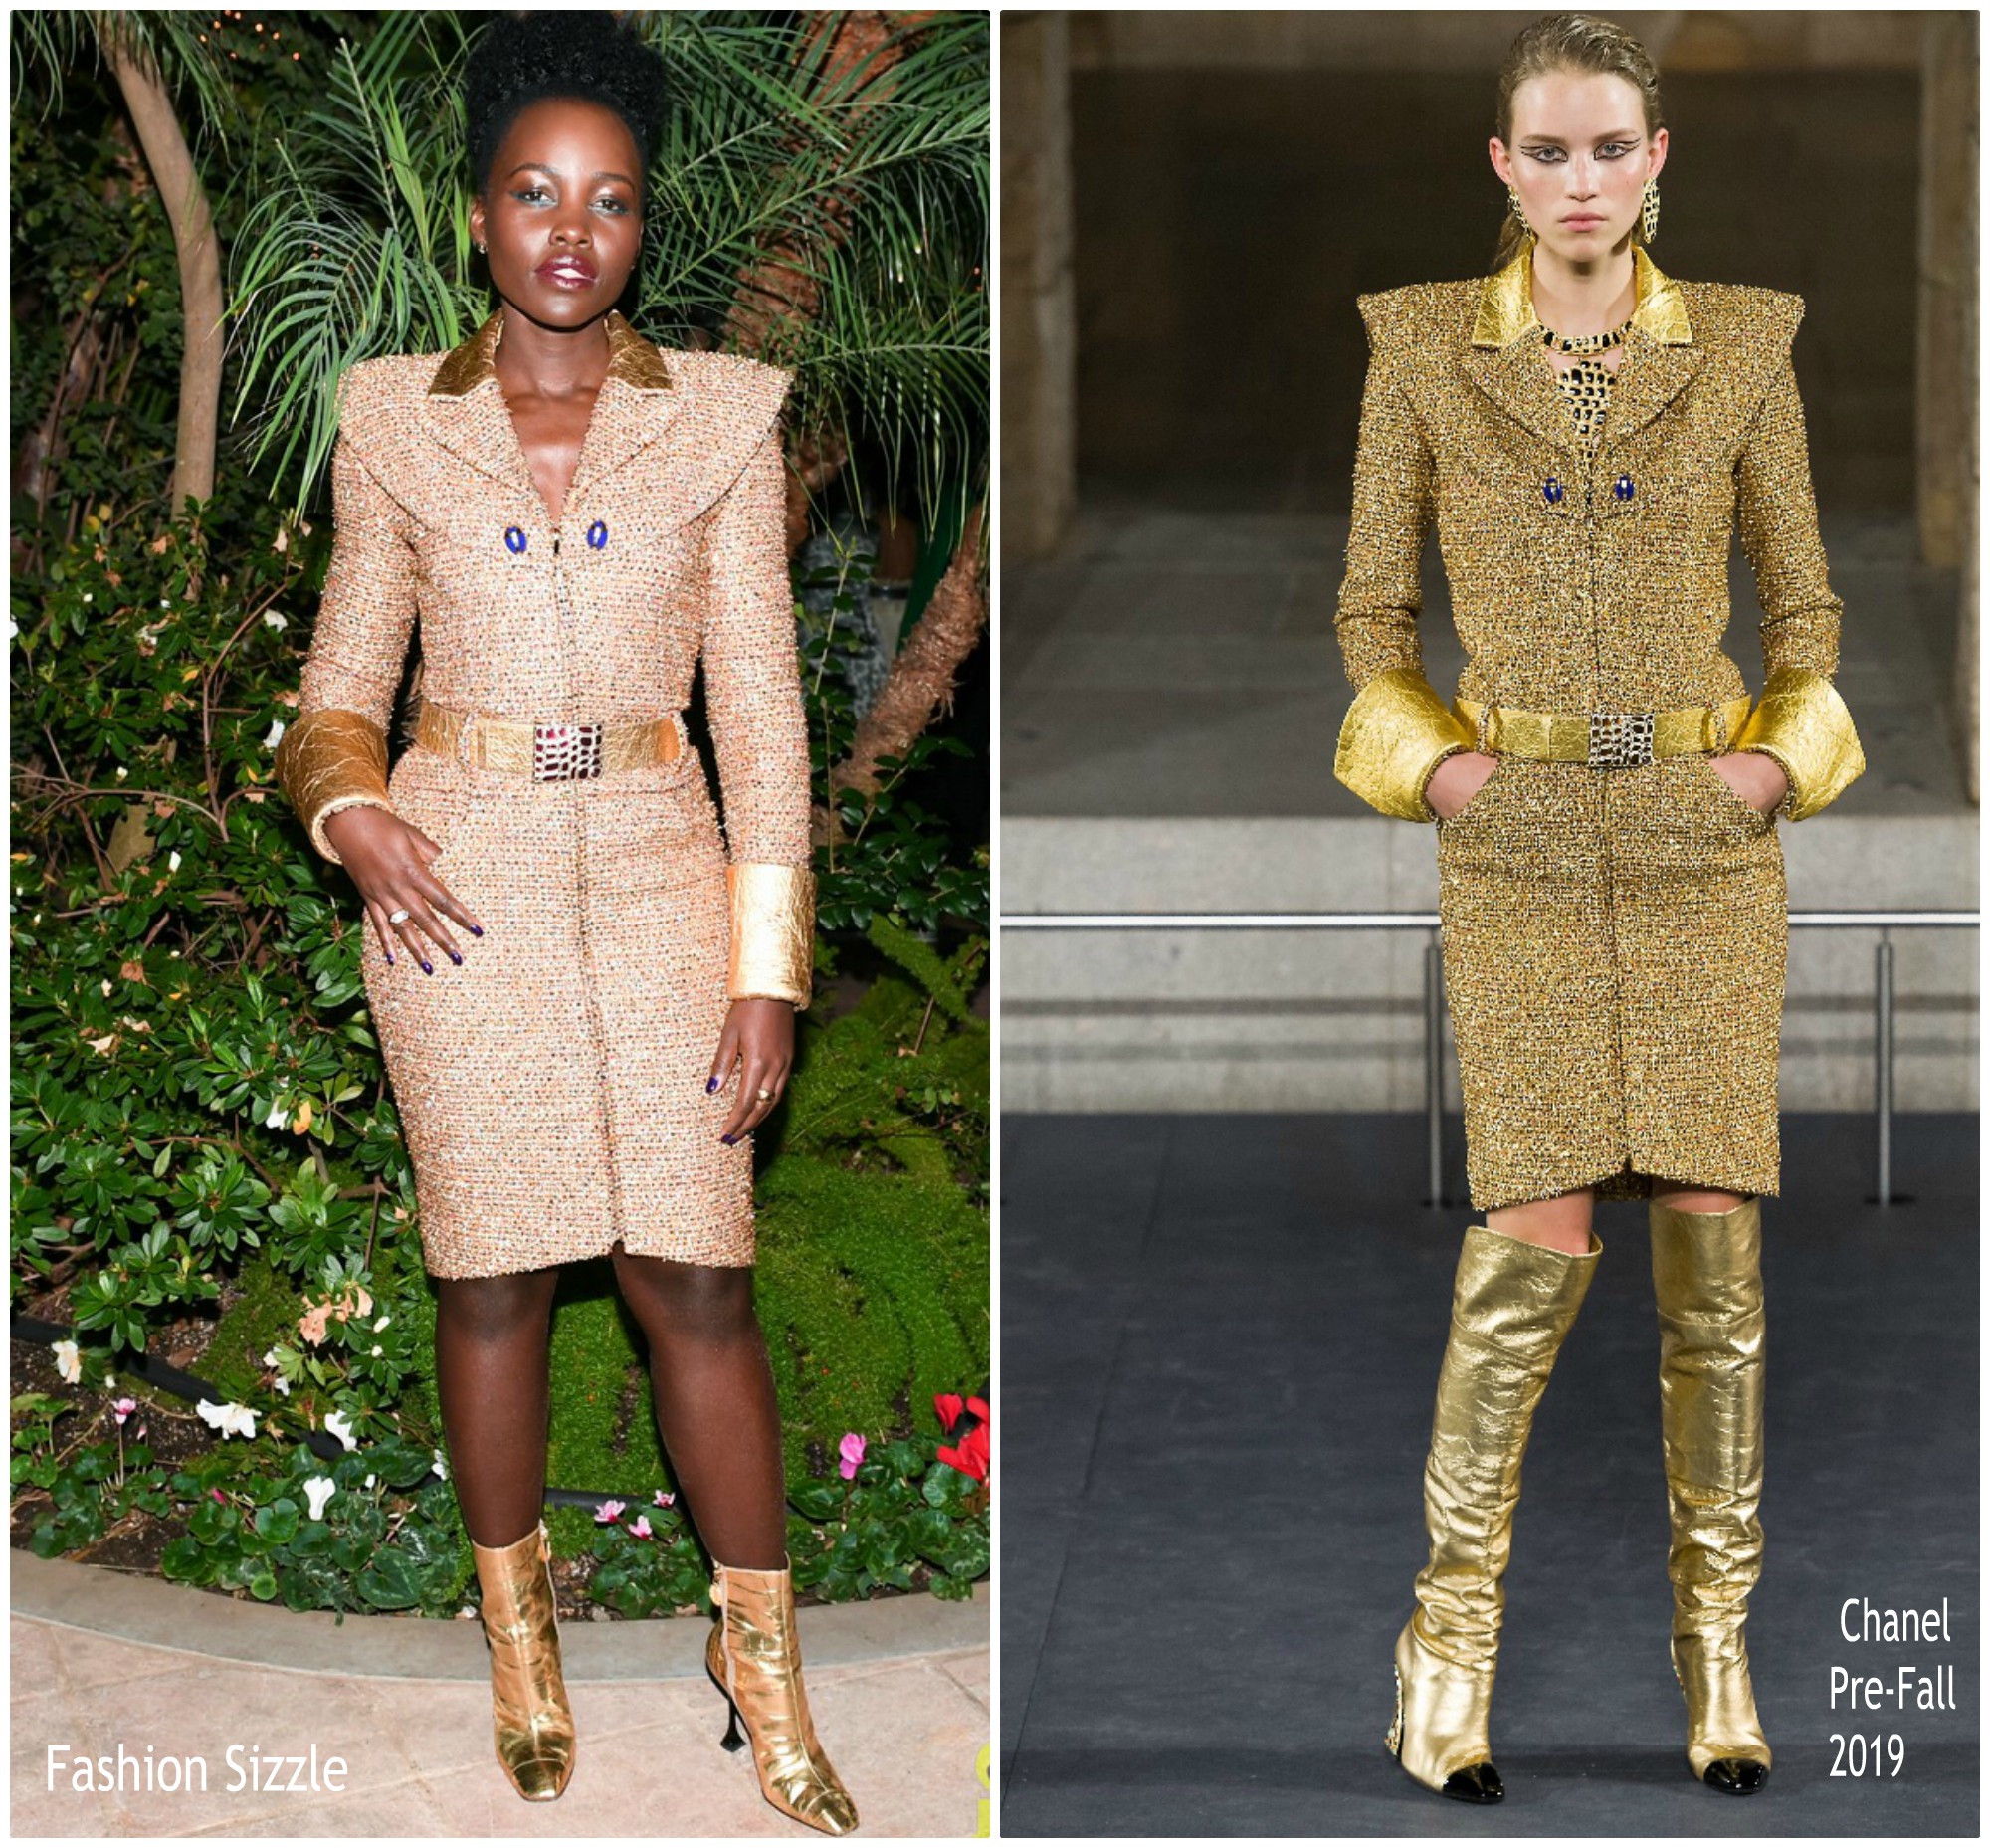 lupita-nyongo-in-chanel-2019-chanel-and-charles-finch-pre-oscar-awards-dinner